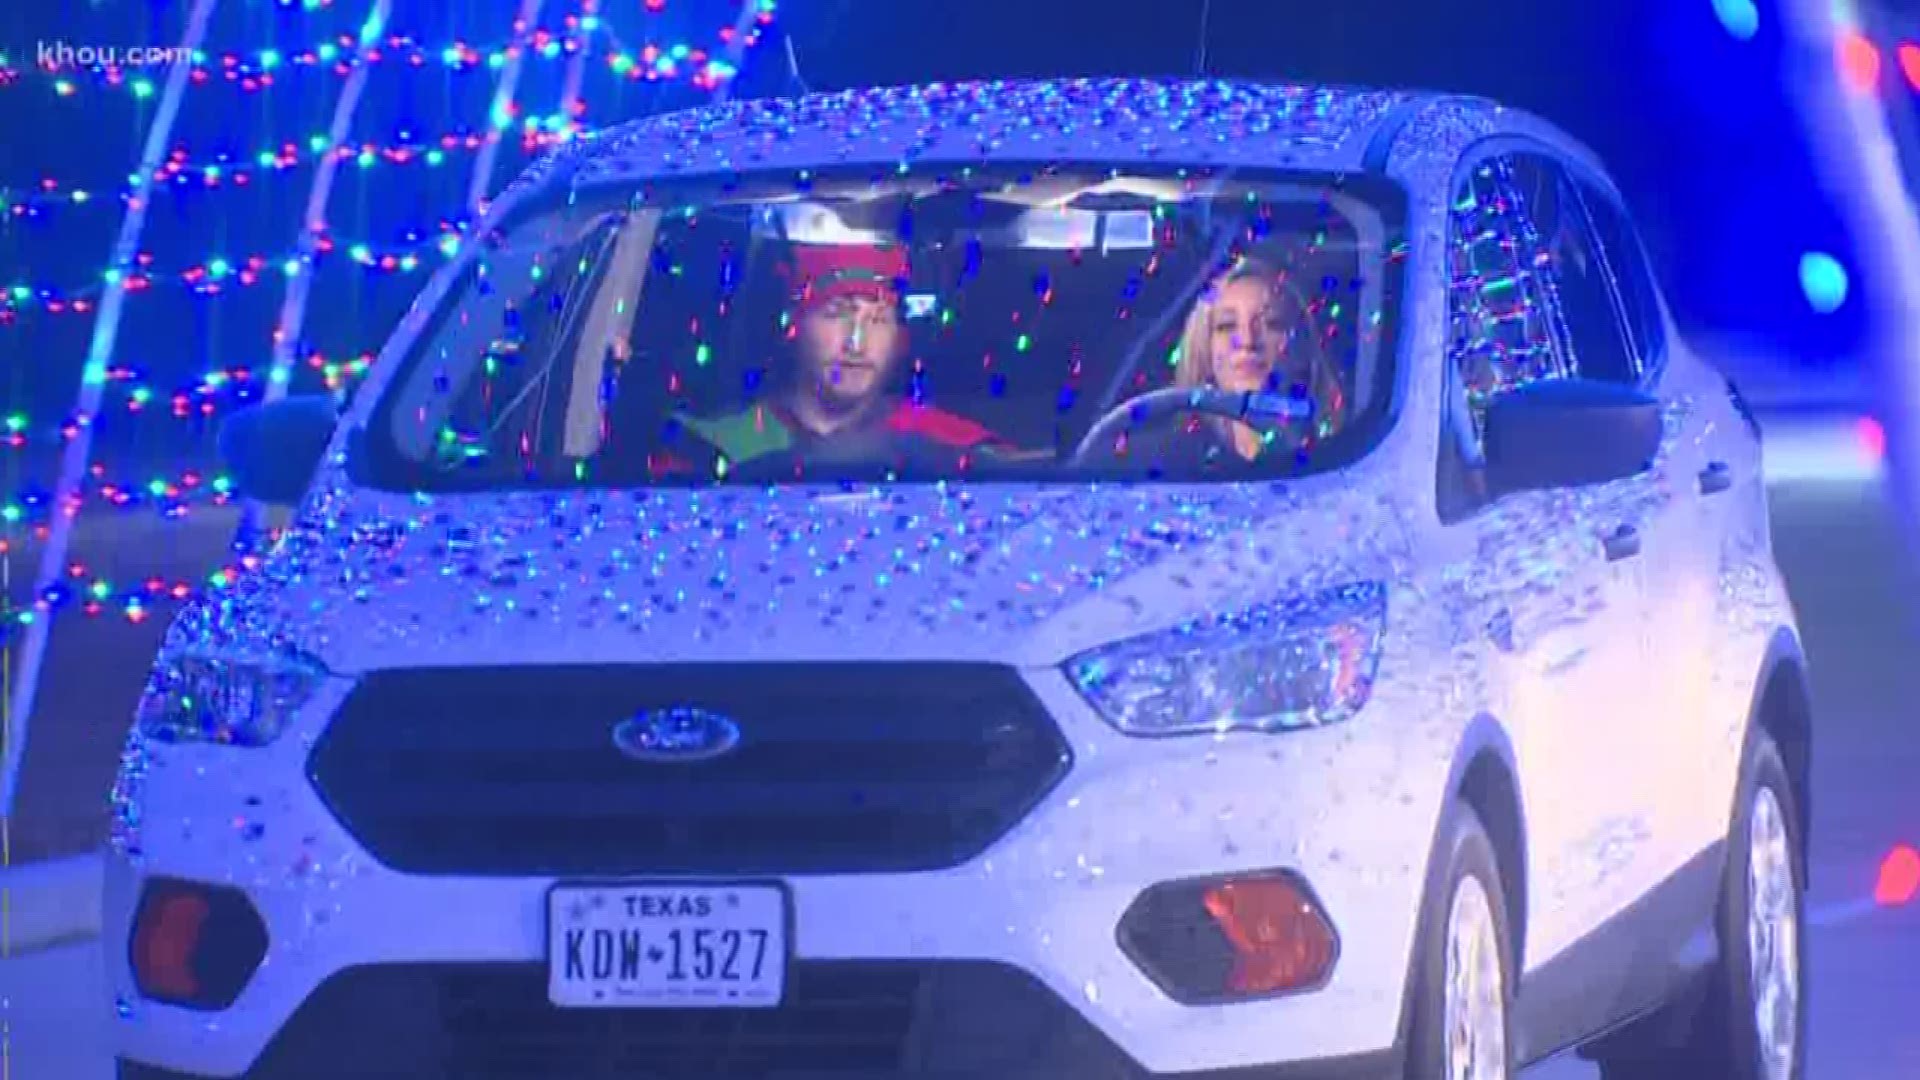 A car wash in Spring made famous for its Halloween-themed experience in October is back at it again, this time offering a Christmas theme.